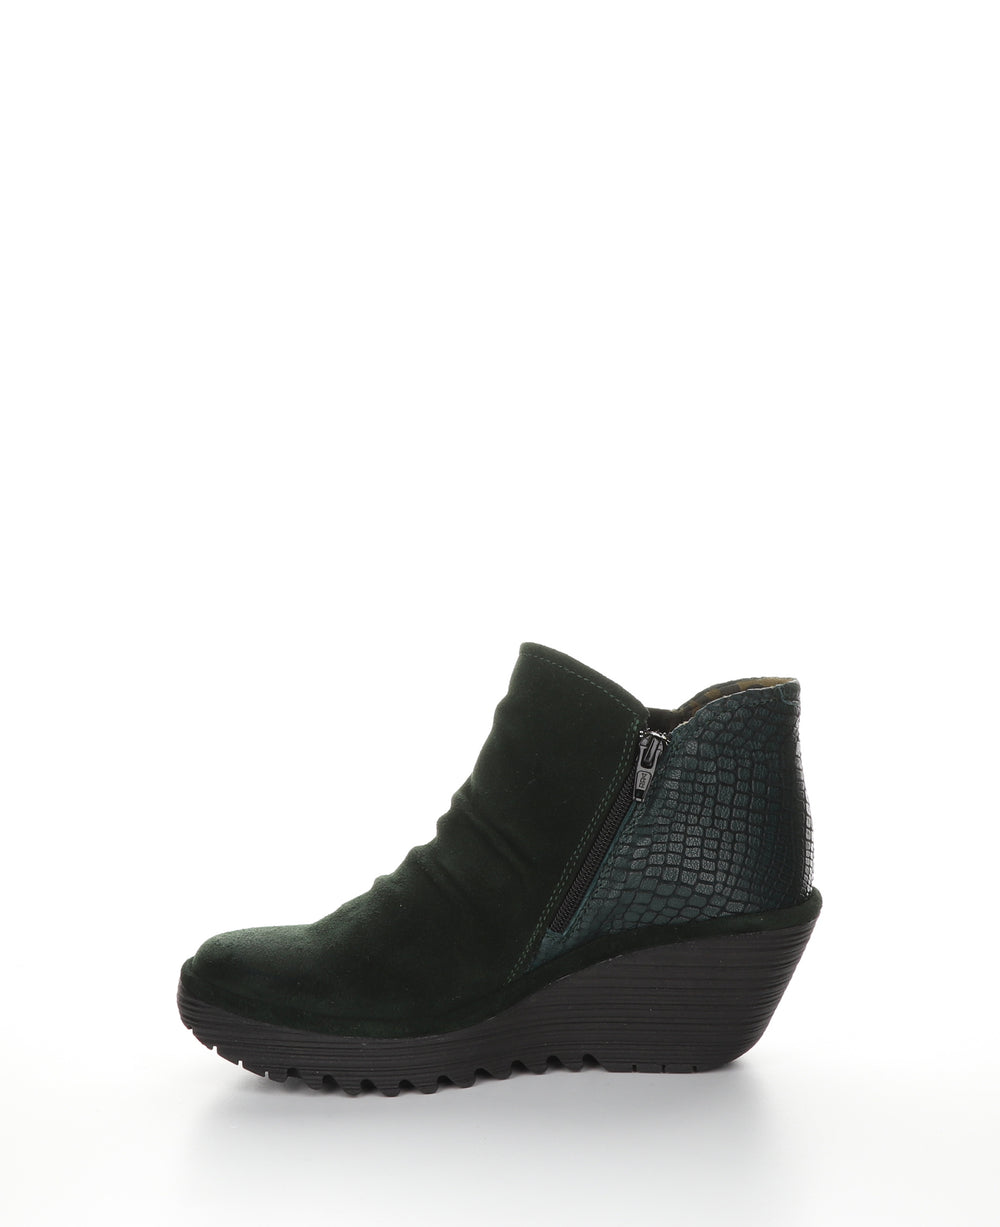 YAMY266FLY Green Forest Zip Up Ankle Boots